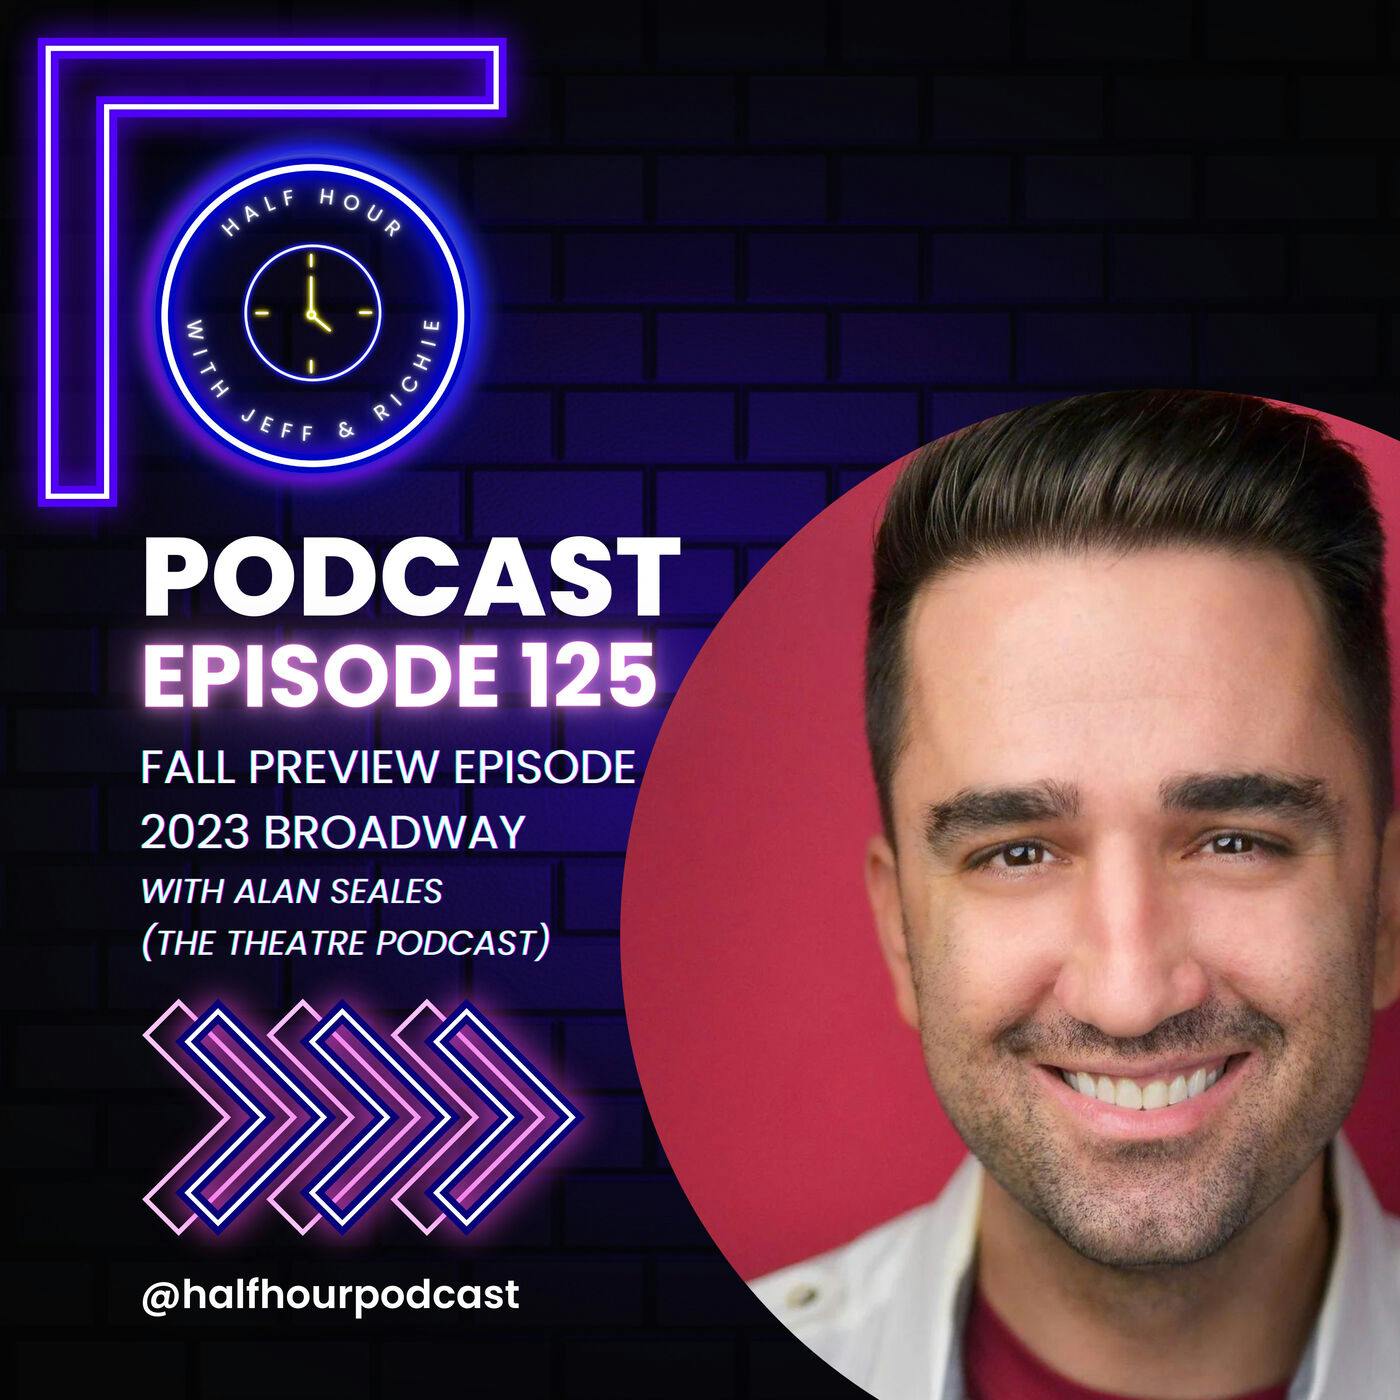 The Fall 2023 Broadway Season Conversation with ALAN SEALES (The Theatre Podcast)